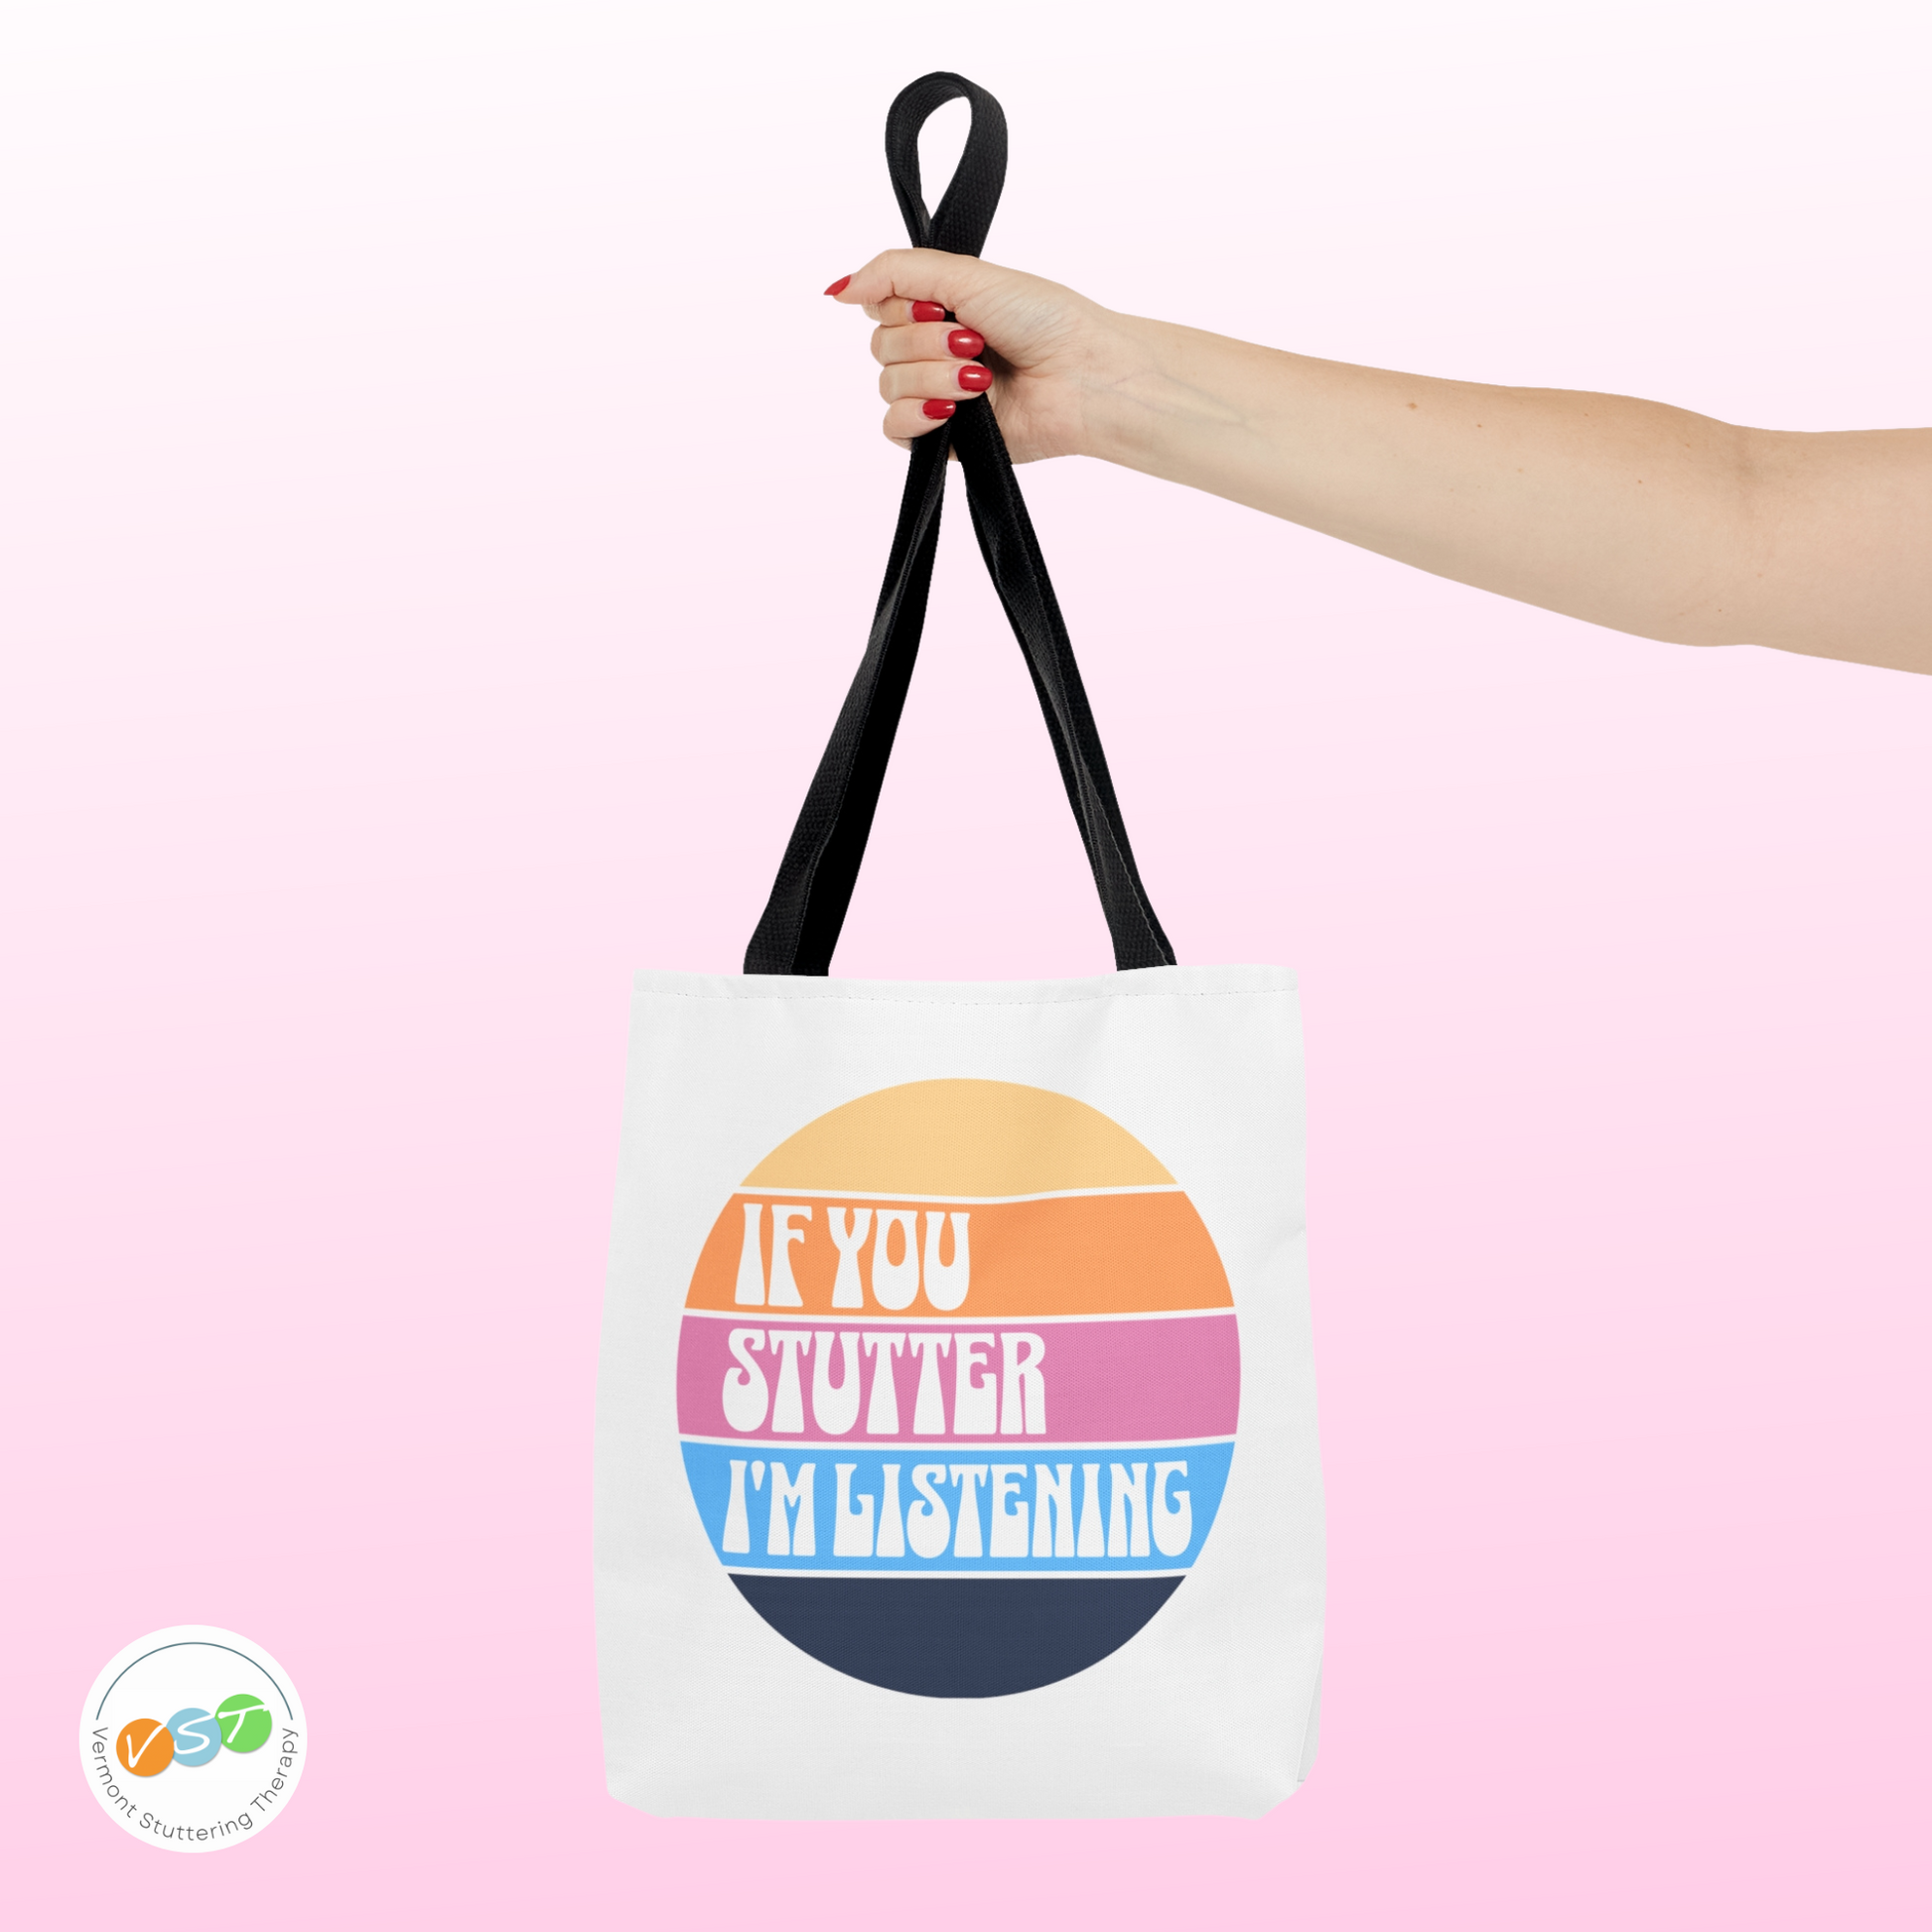 Stuttering Ally If you Stutter, I'm Listening Tote Bag - Normalize Stuttering Challenge